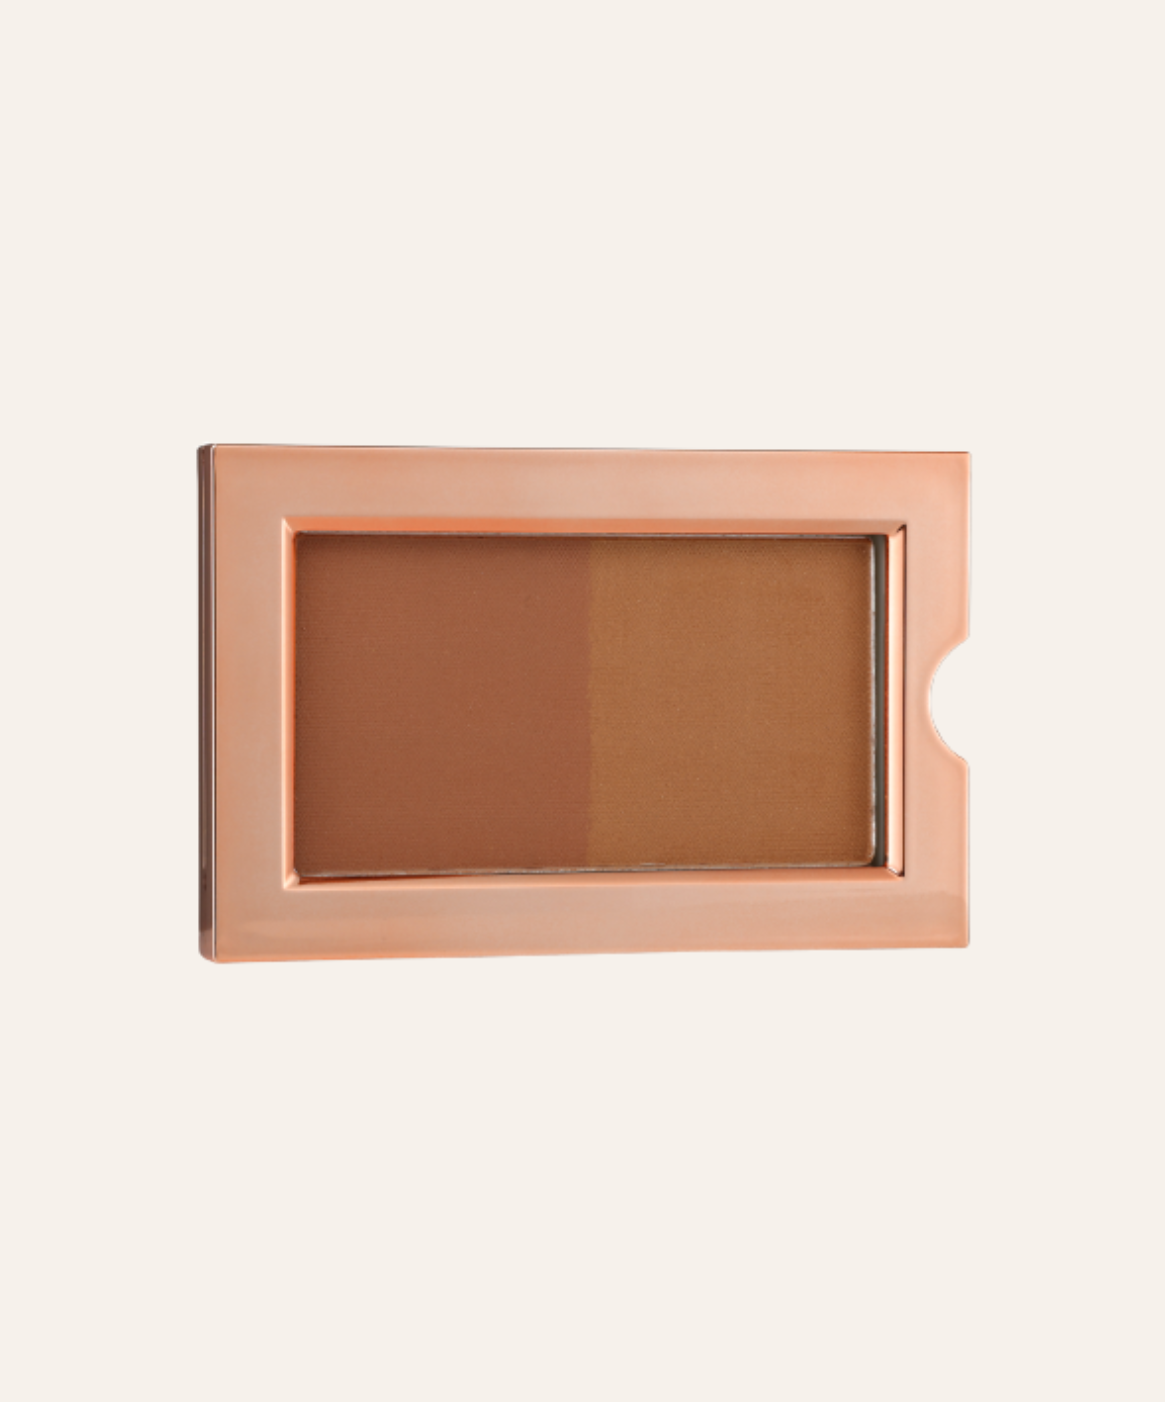 Cha Ching Bronzer (2-in-1) - $elf Made - Typsy Beauty